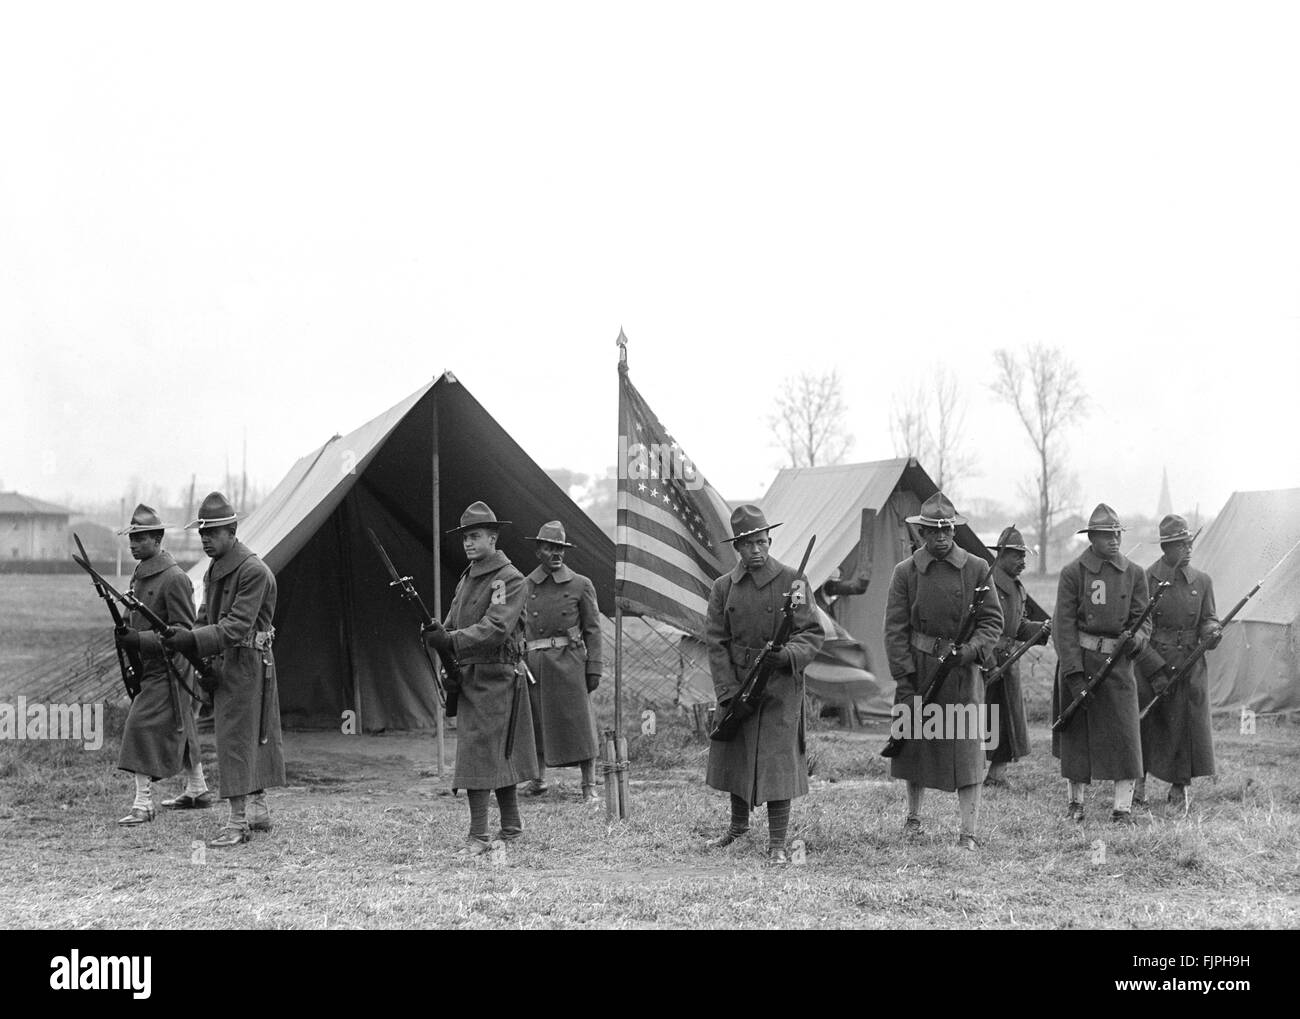 American Soldiers with Bayonets affixed to Rifles guarding Army Tents and American Flag, Harris & Ewing, 1917 Stock Photo